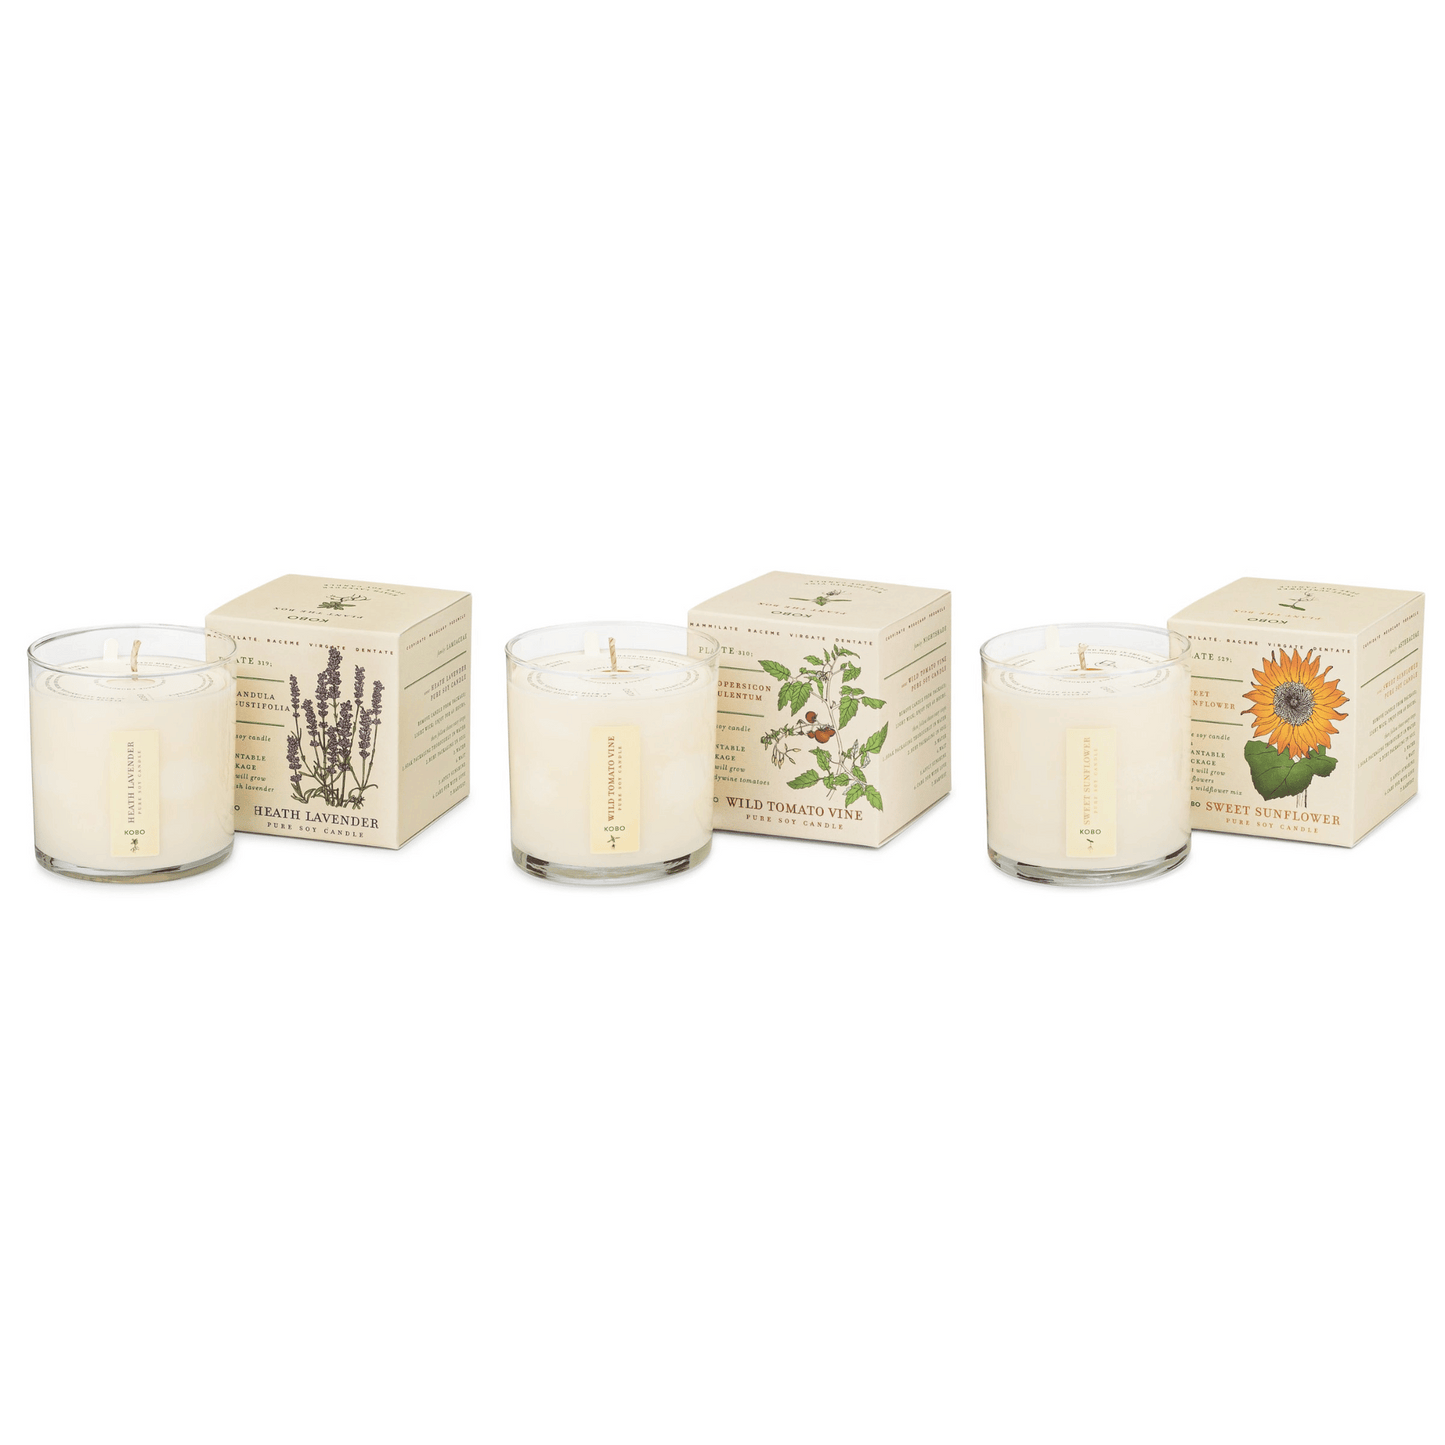 Primary Image of Endless Summer Plant the Box Bundle 3 x 9 oz. Candles